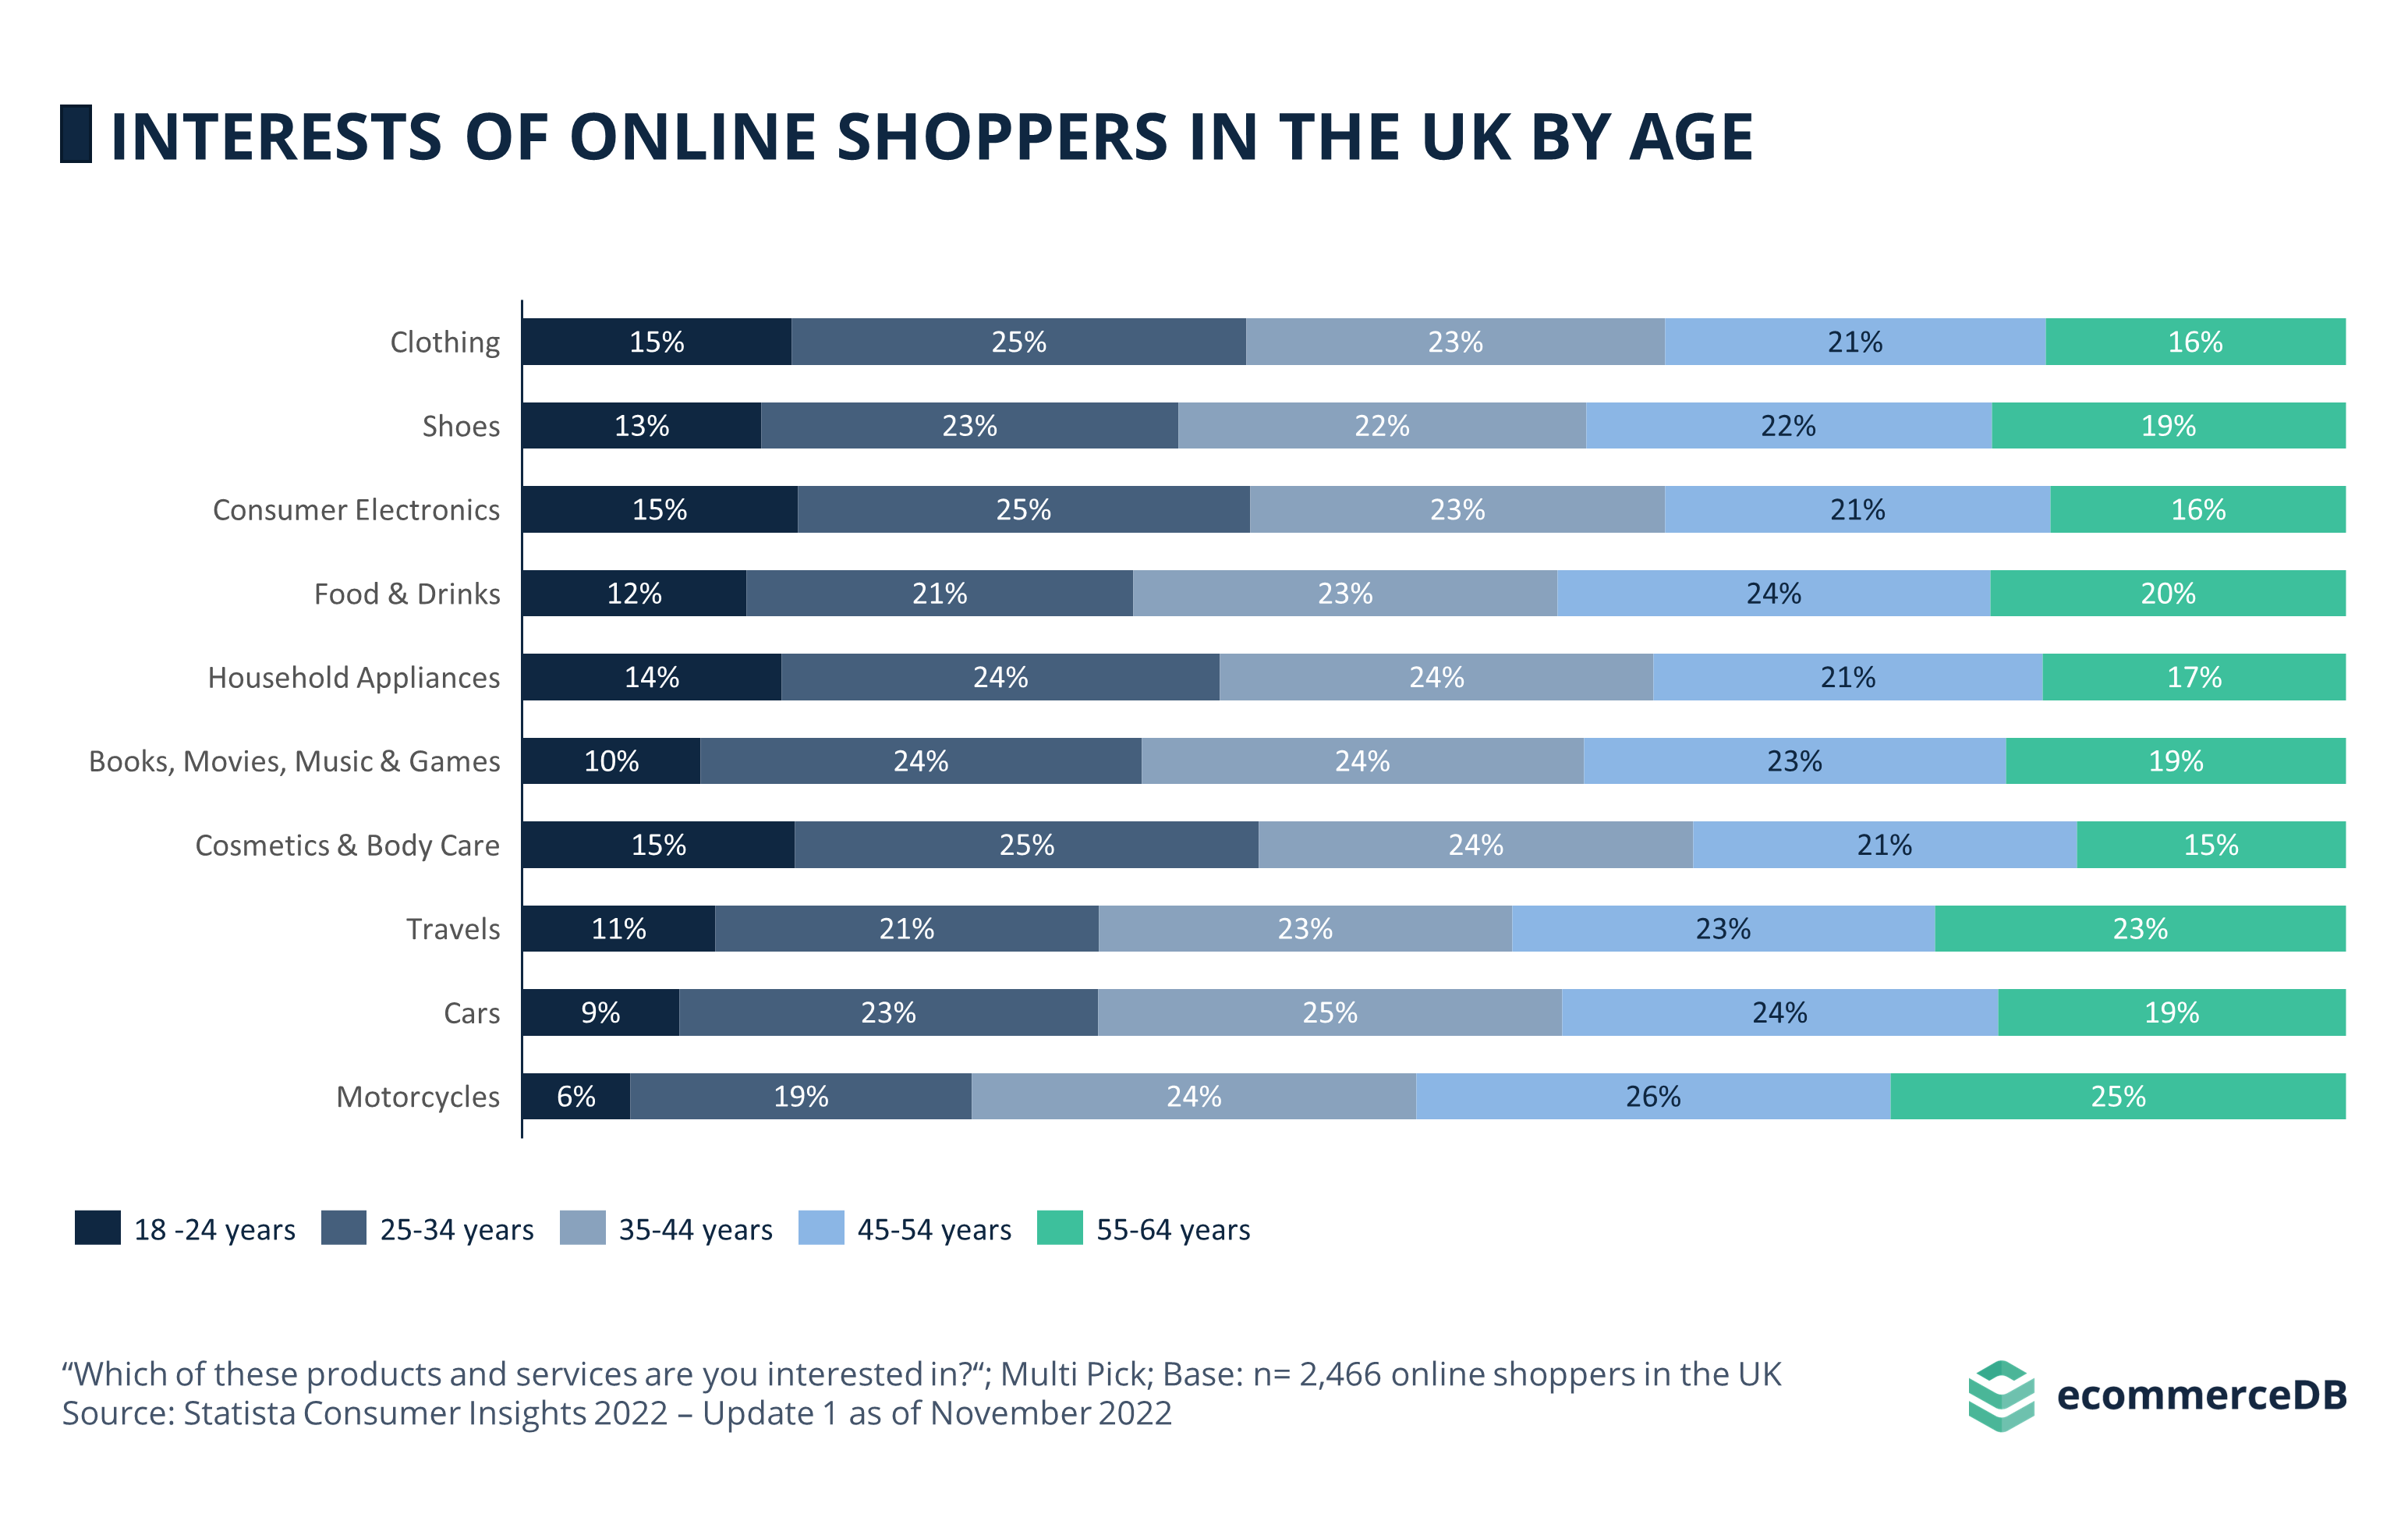 Interests of Online Shoppers in the UK by Age Group